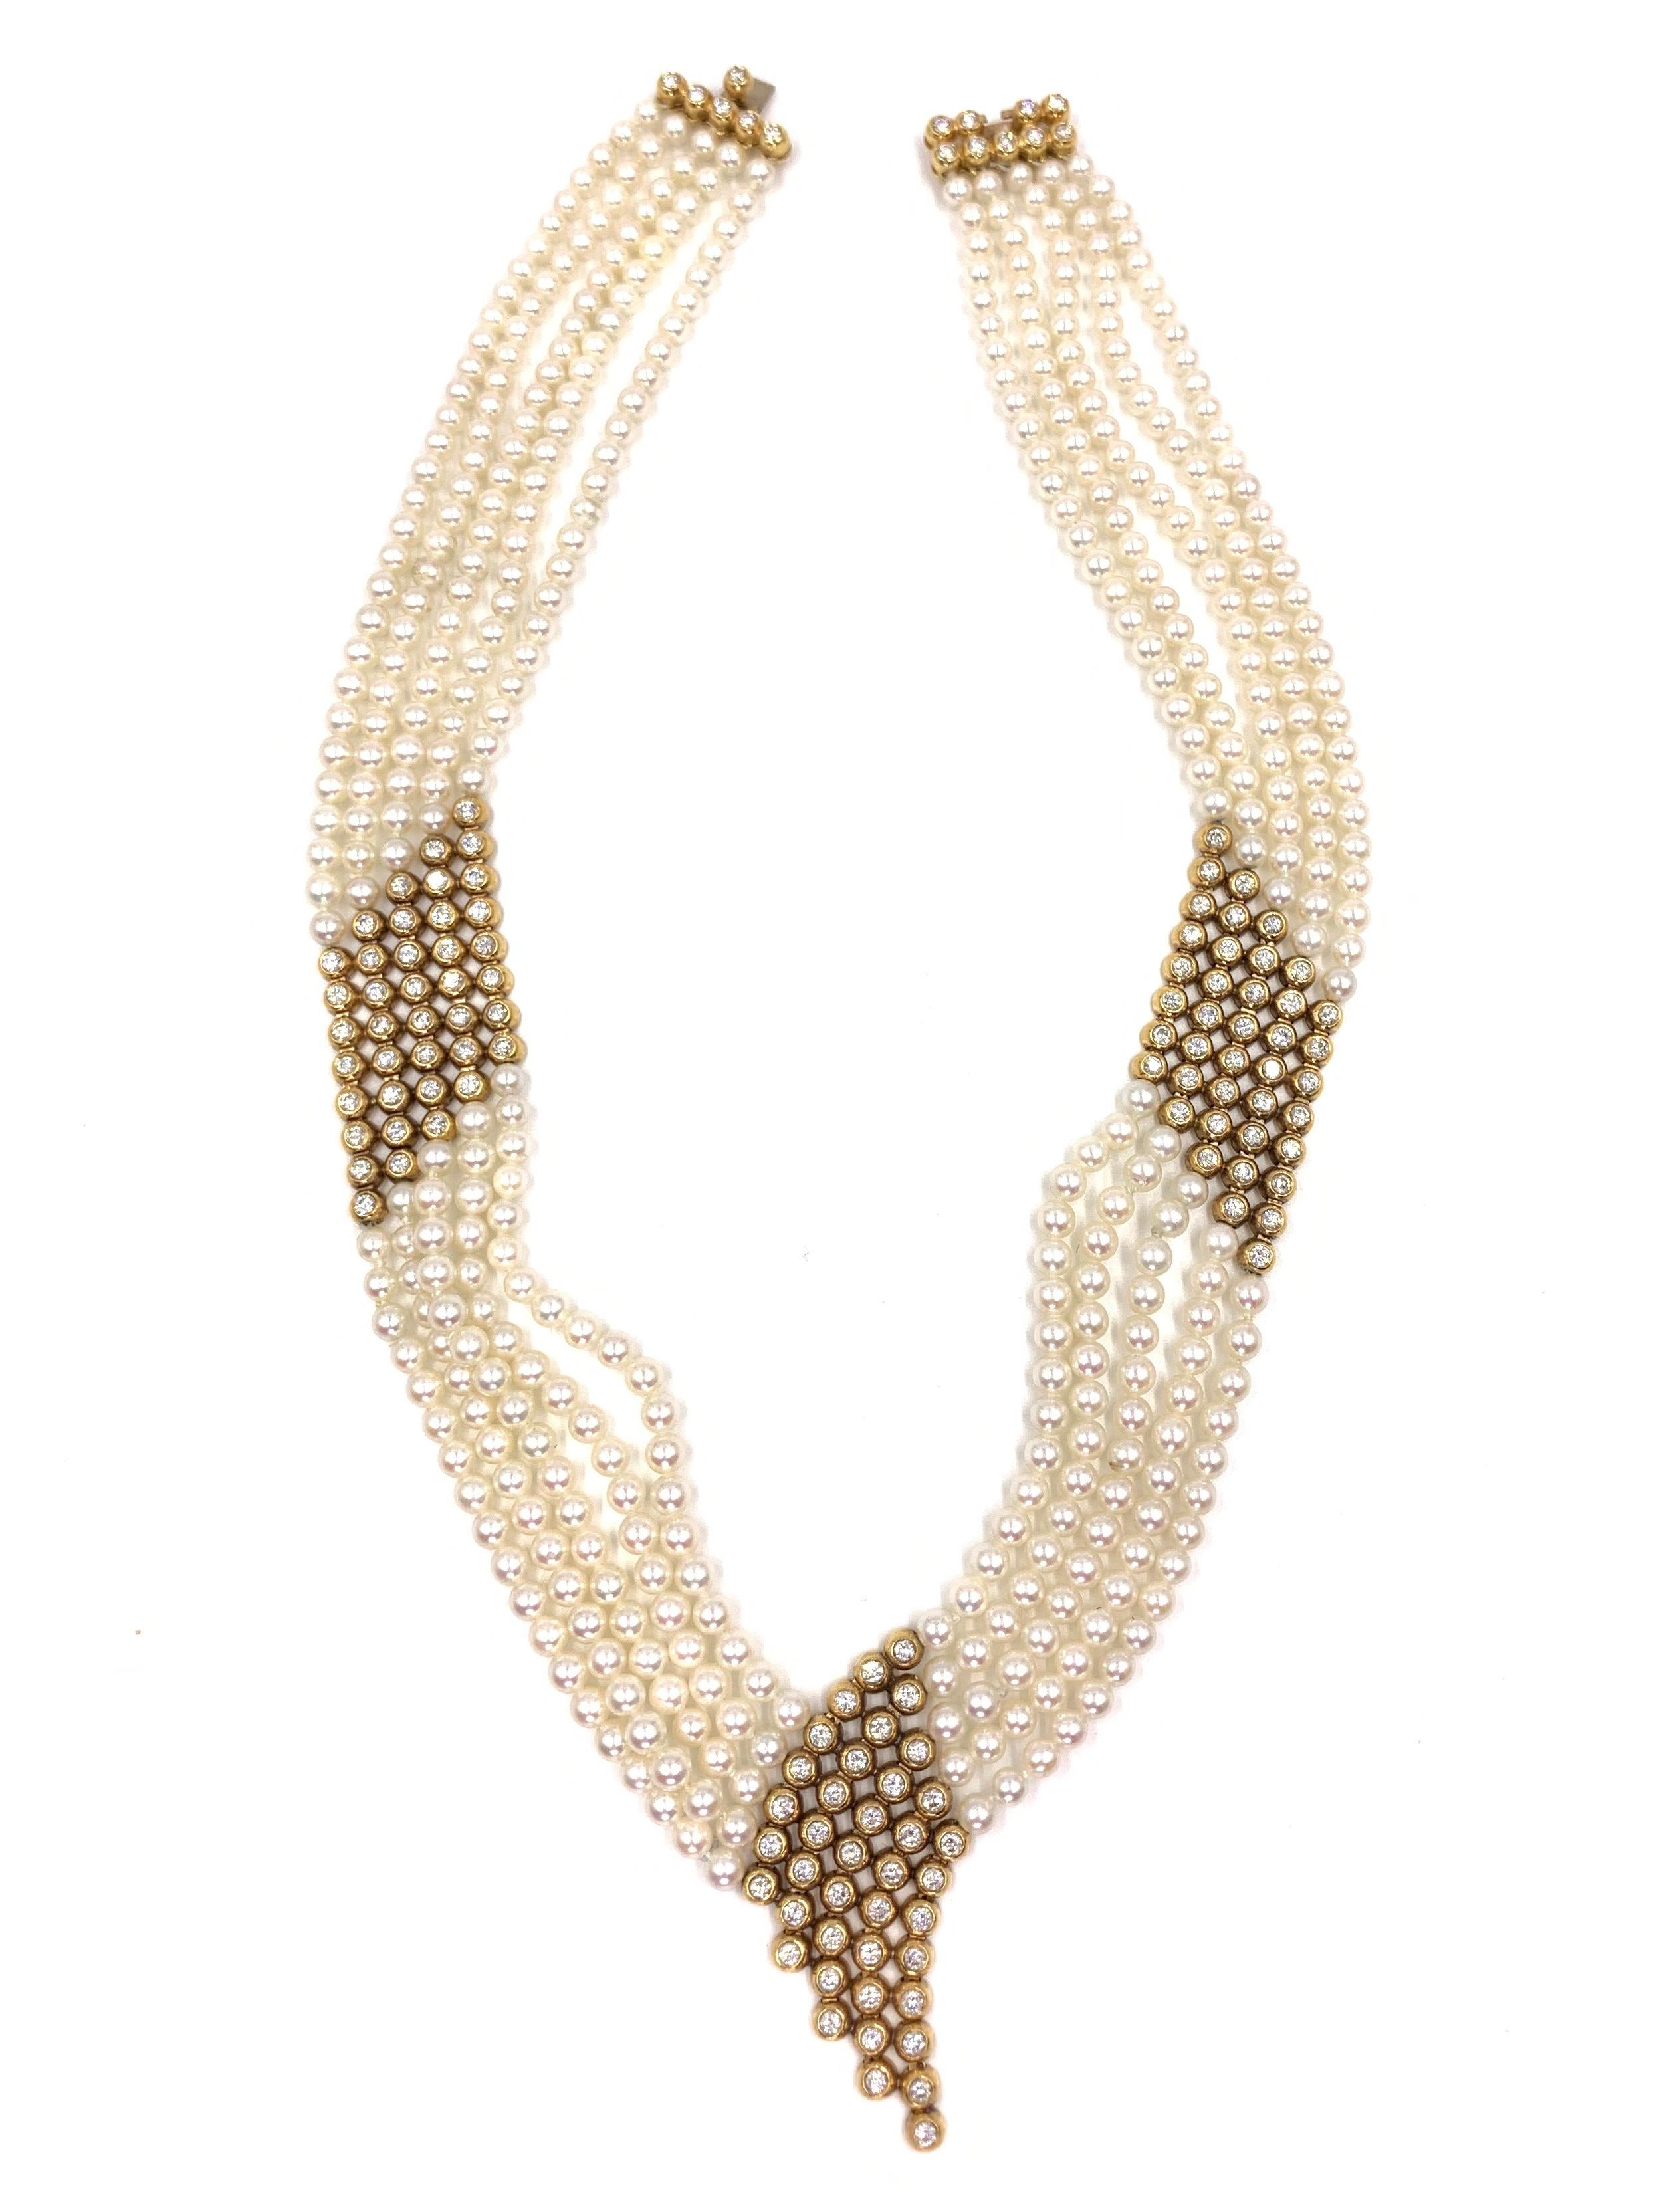 Round Cut Yellow Gold Diamond and Pearl Multi-Strand Necklace For Sale